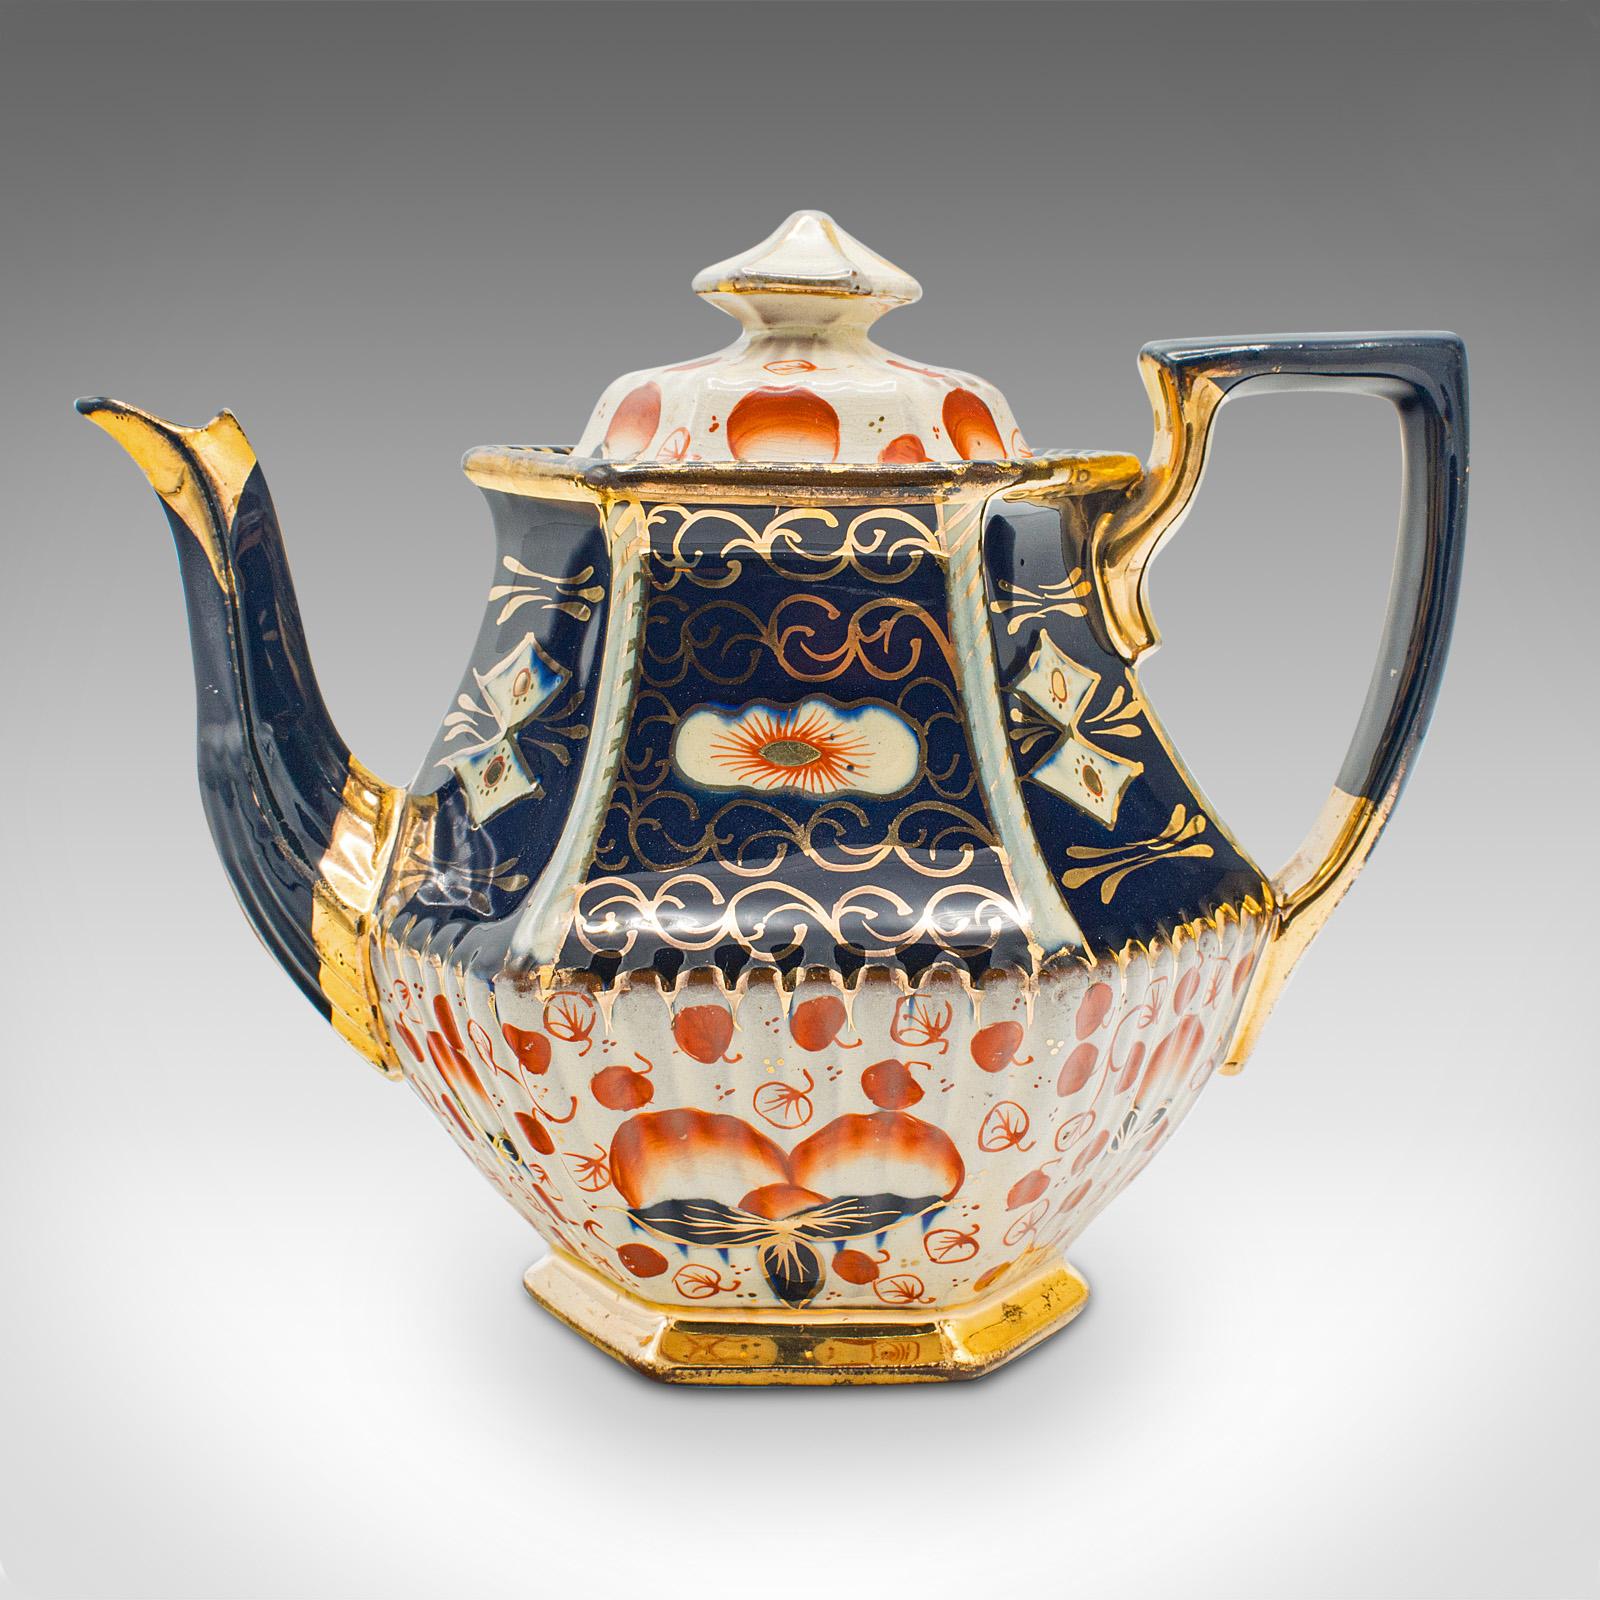 This is an antique Imari pattern teapot. An English, ceramic decorative tea kettle, dating to the late Victorian period, circa 1900.

Delightful English interpretation of Japanese Imari
Displays a desirable aged patina and in good order
Glazed